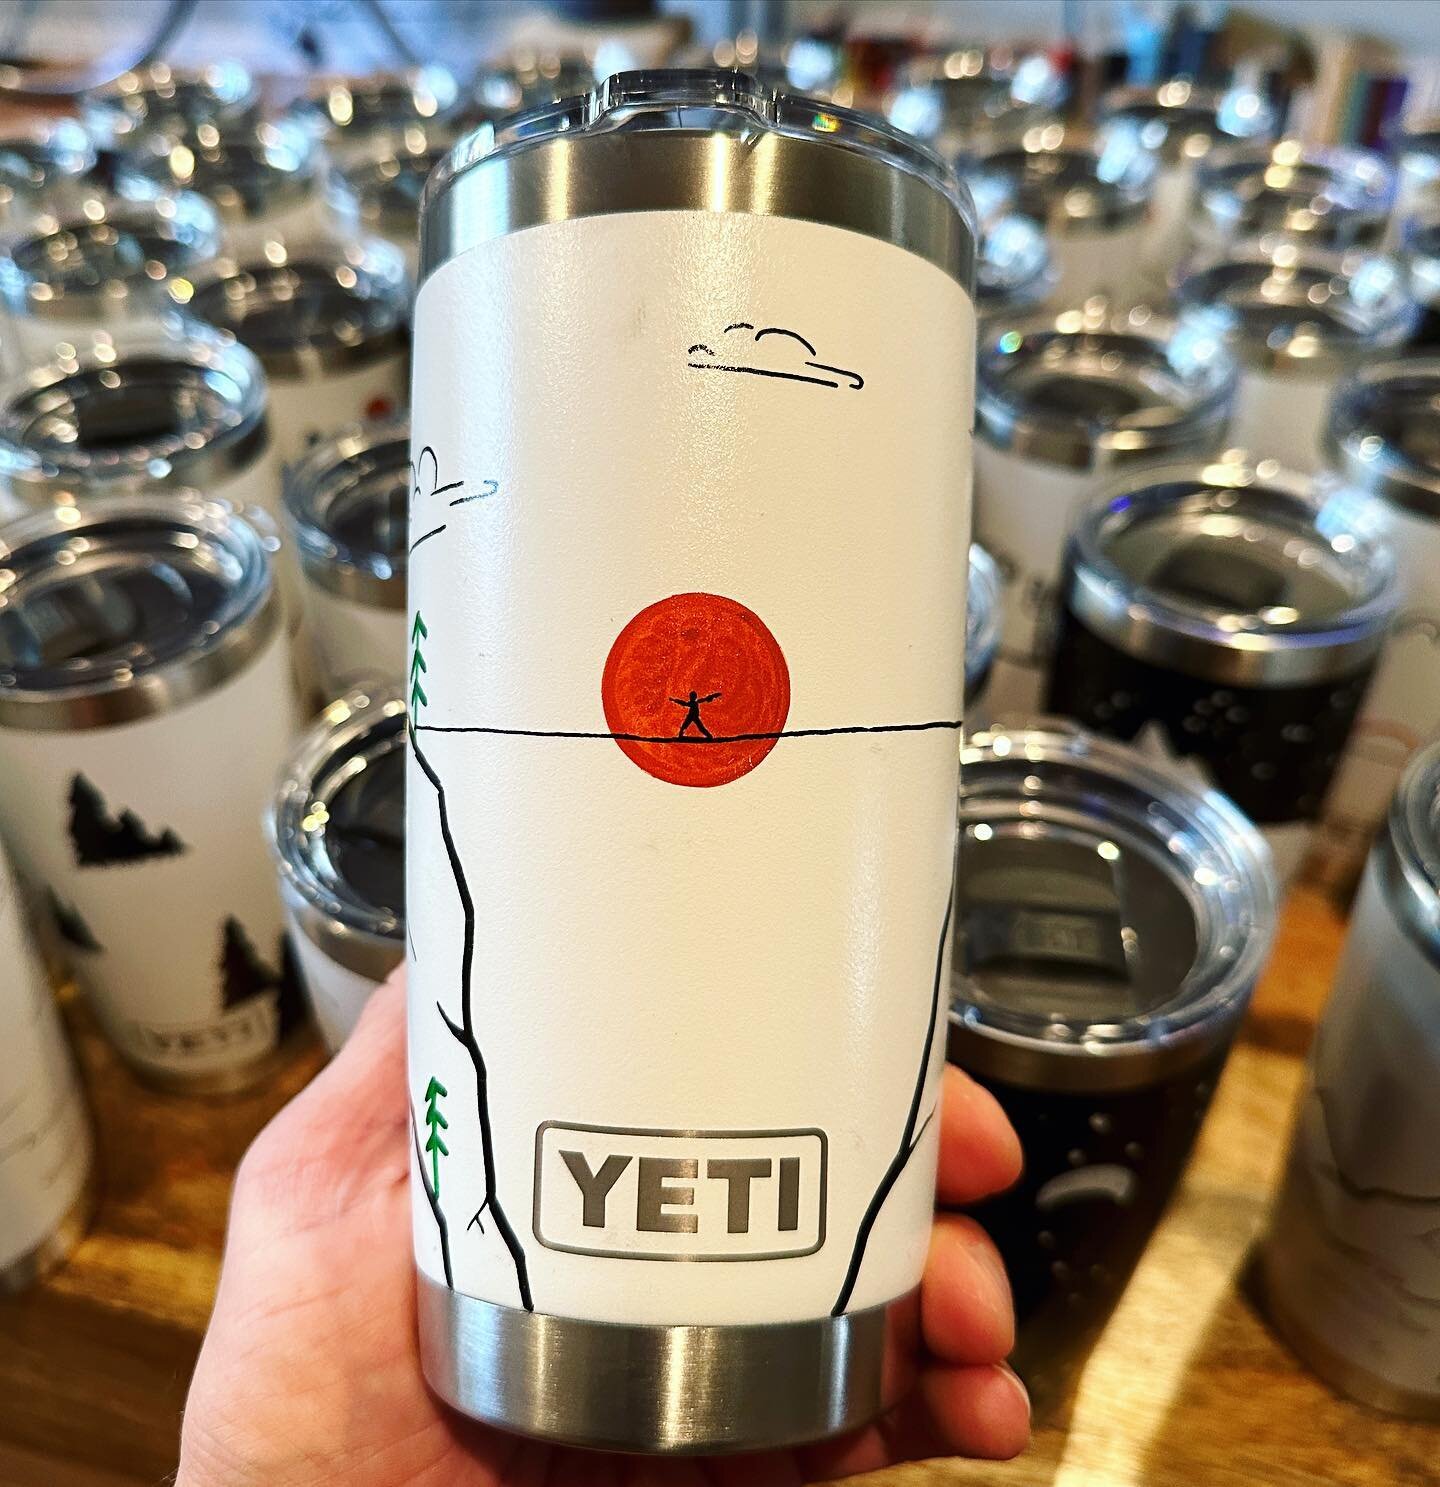 @slacklinechicago this one is for you! Not sure if it&rsquo;s still available at the @yeti store here in Chicago, but you should go check it out!